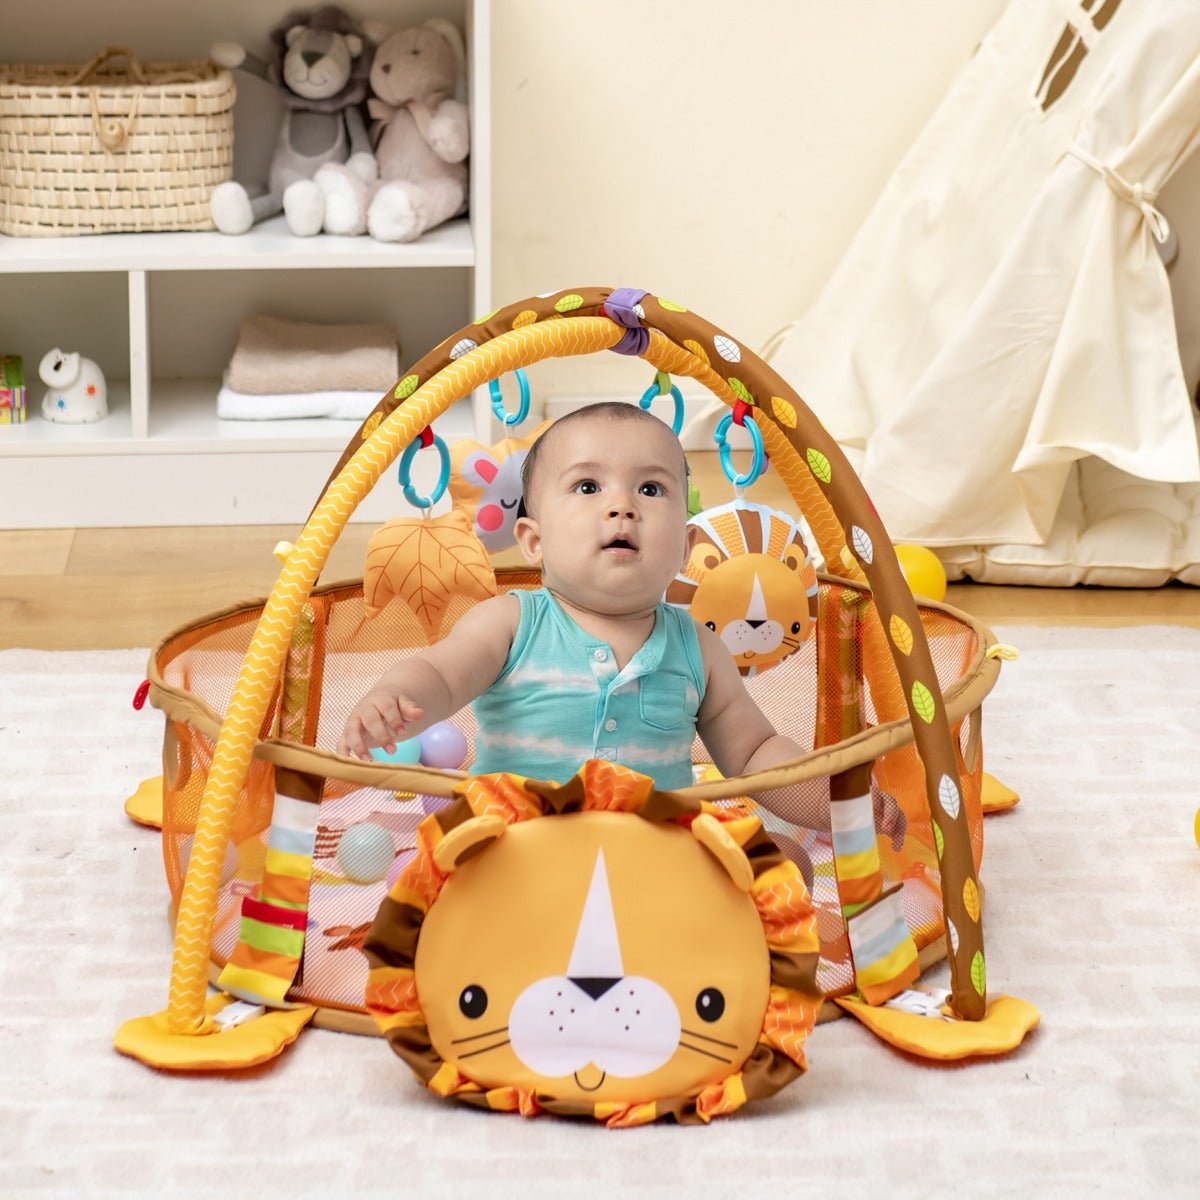 Buy the Ultimate 4-in-1 Baby Play Gym for Joyful Learning